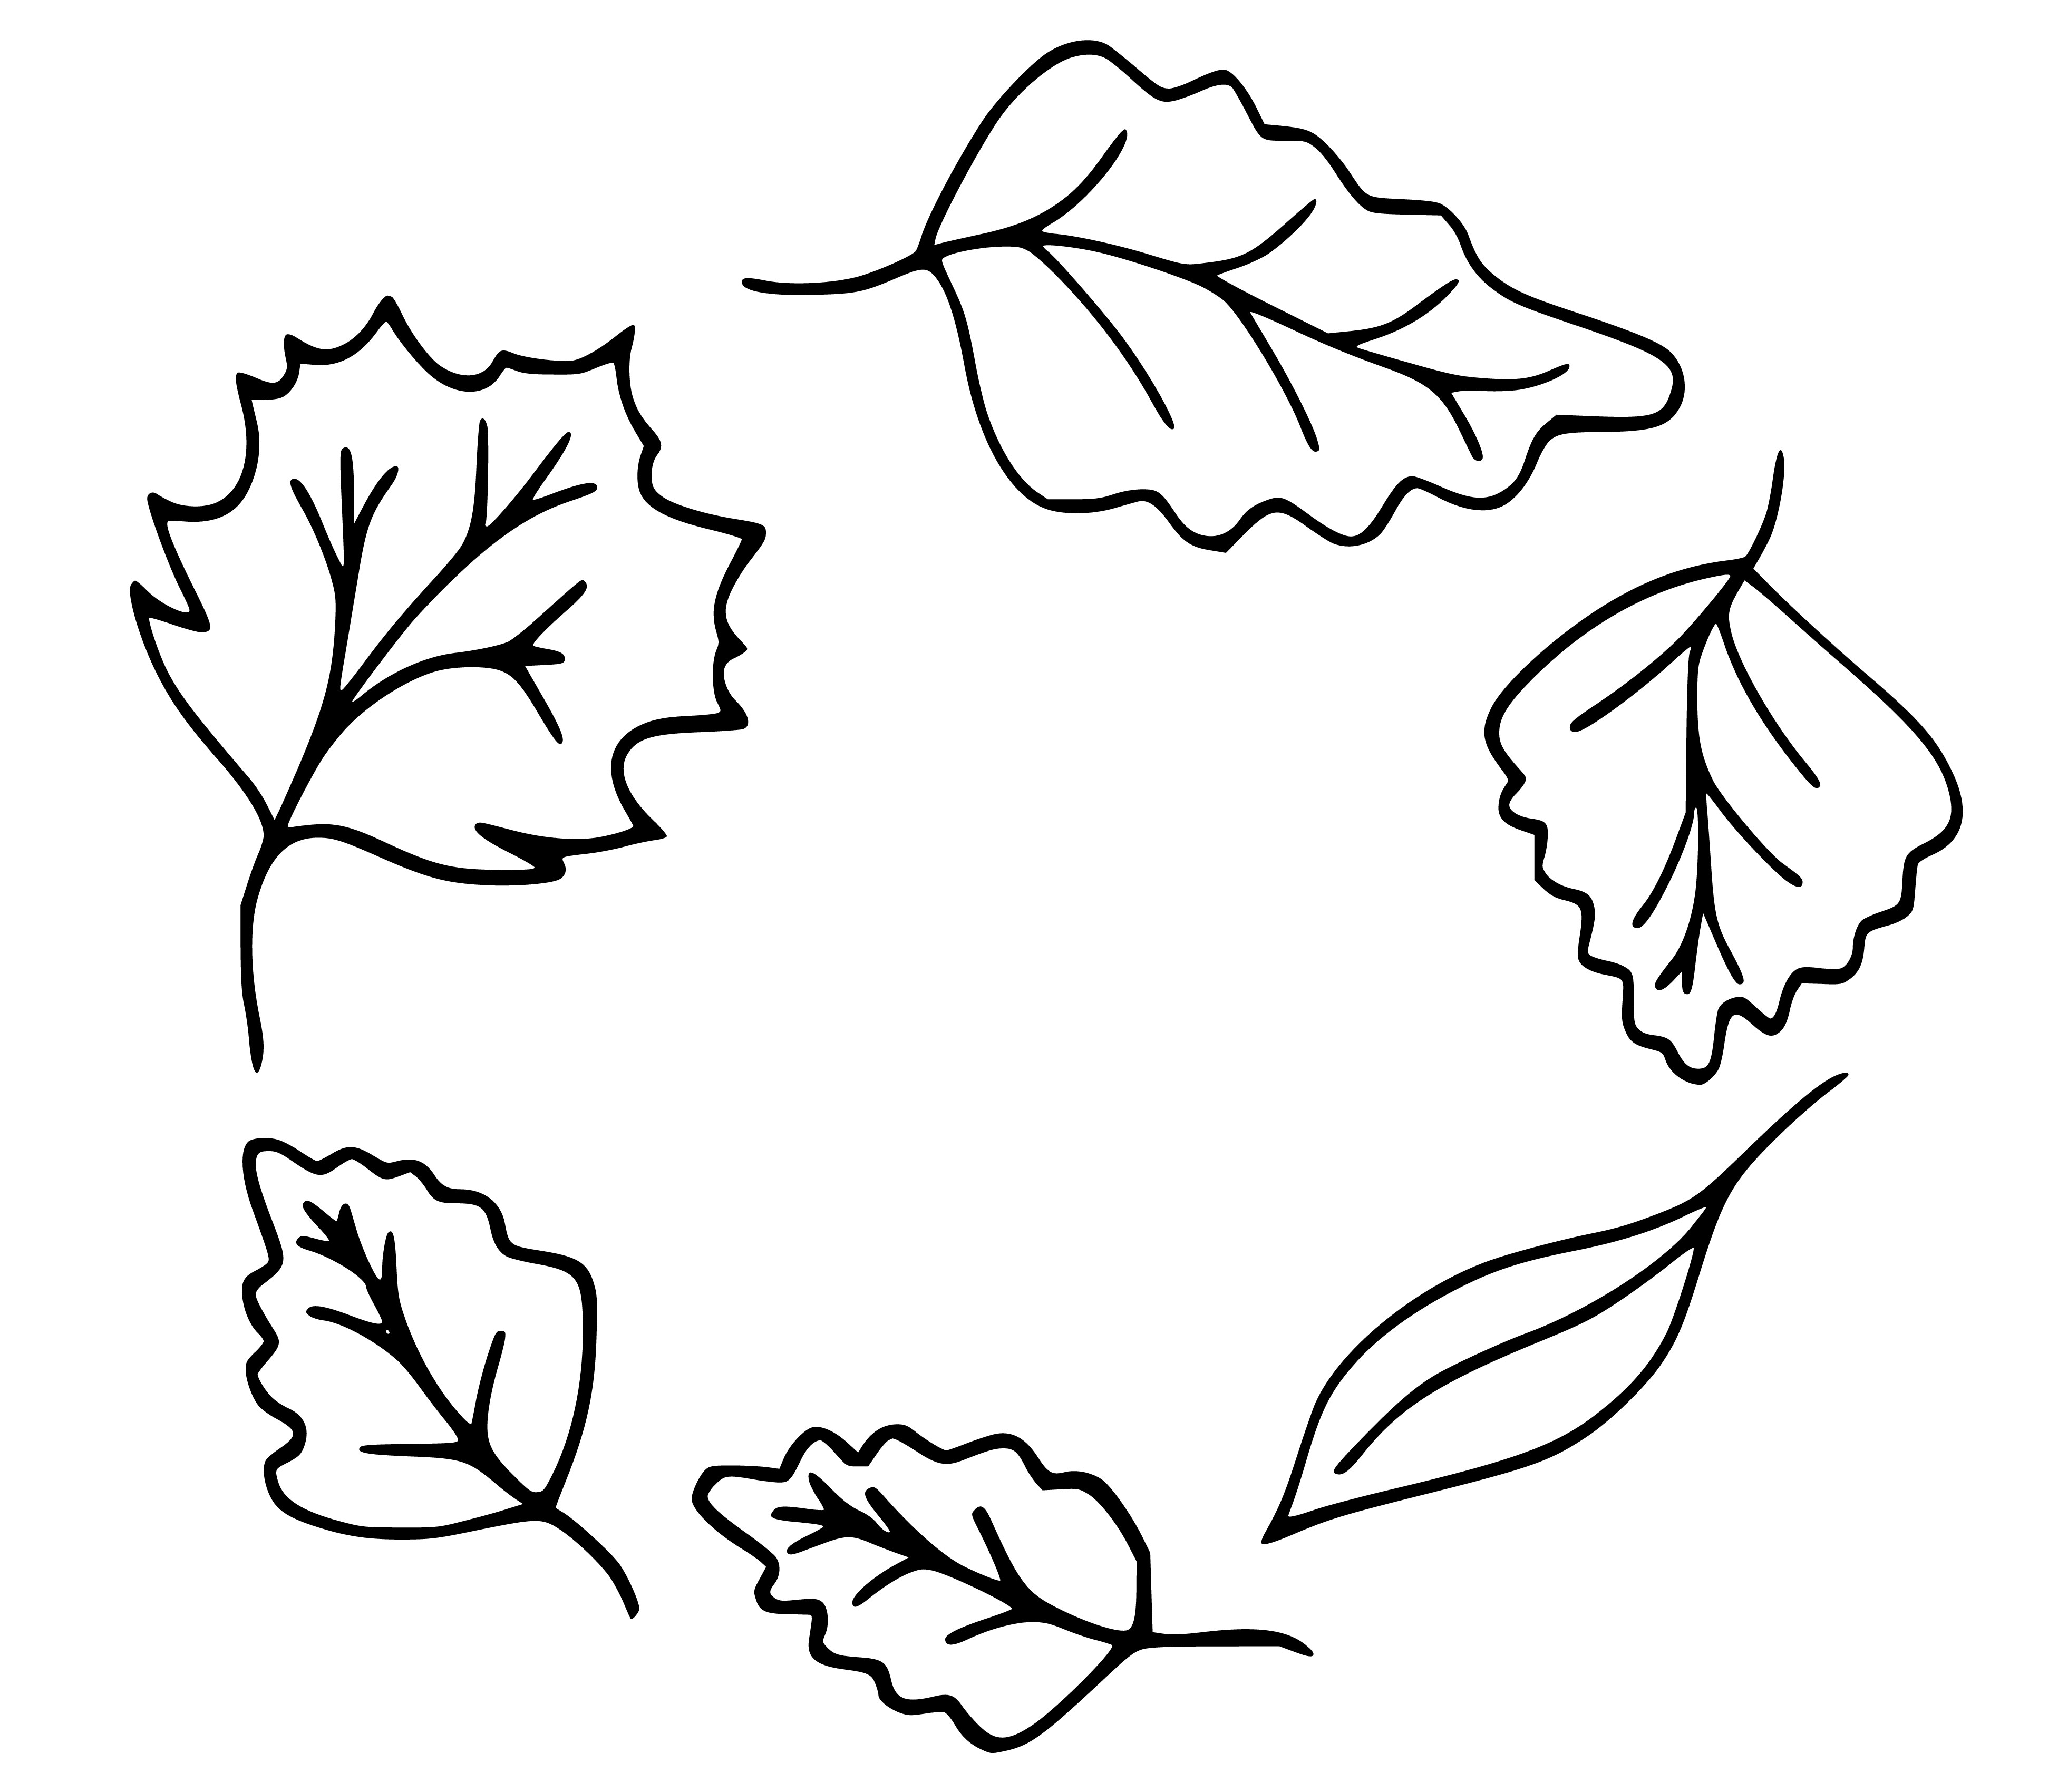 Various Leaves Coloring Page Printable for Kids, Free, Simple and Easy, as PDF